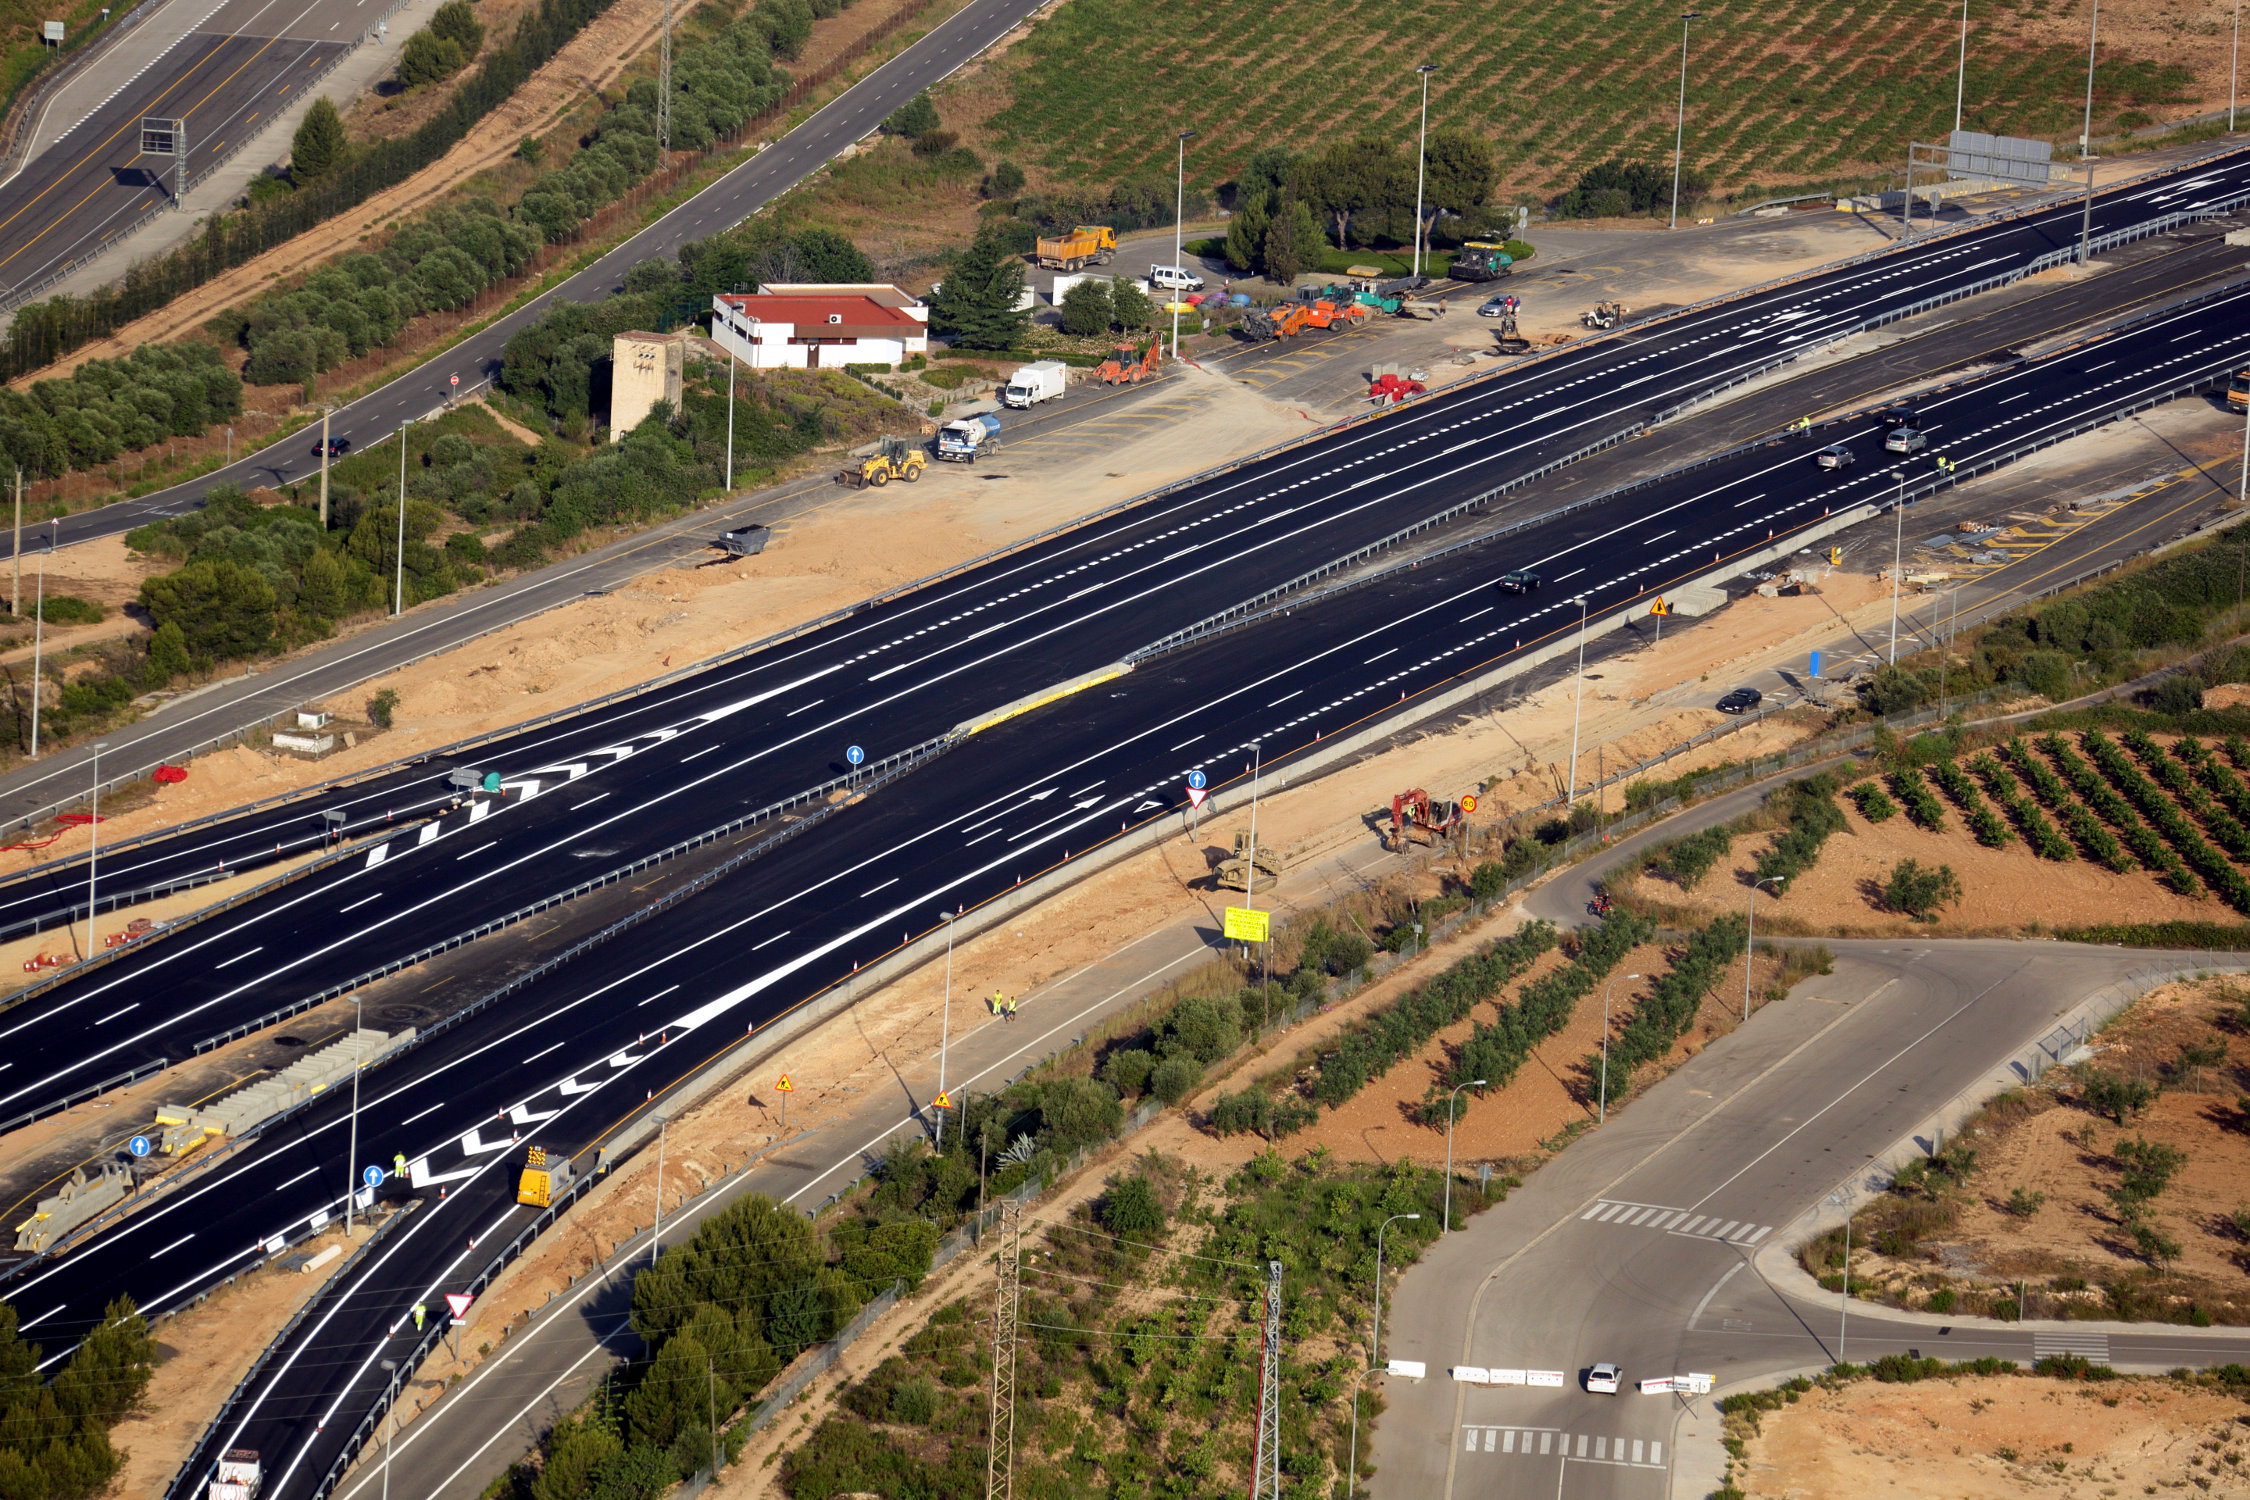 Image of AP7 and A2, two of the main motorways in Catalonia, both managed by Abertis (by ACN)